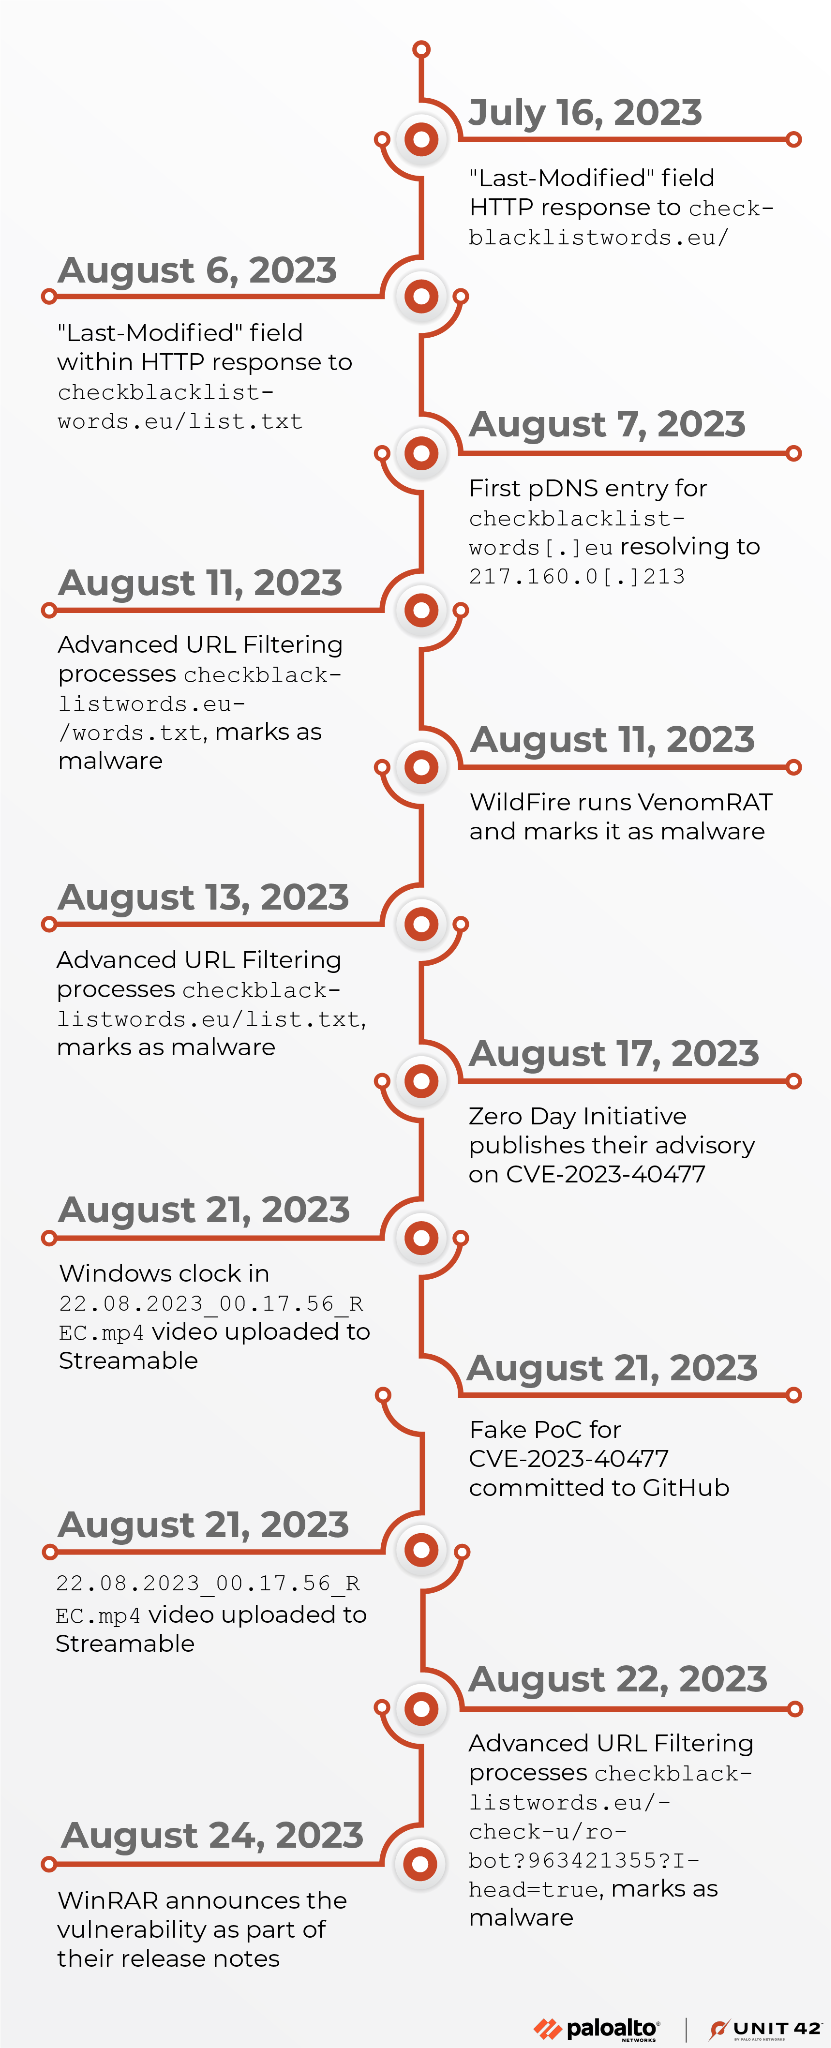 Image 8 is a timeline of events associated with the fake PoC for CVE-2023-40477. It starts on July 16, 2023 with the last modified field HTTP response to checkblacklistwords dot eu. It ends with WinRAR announcing the vulnerability as part of their release notes on August 27, 2023. 